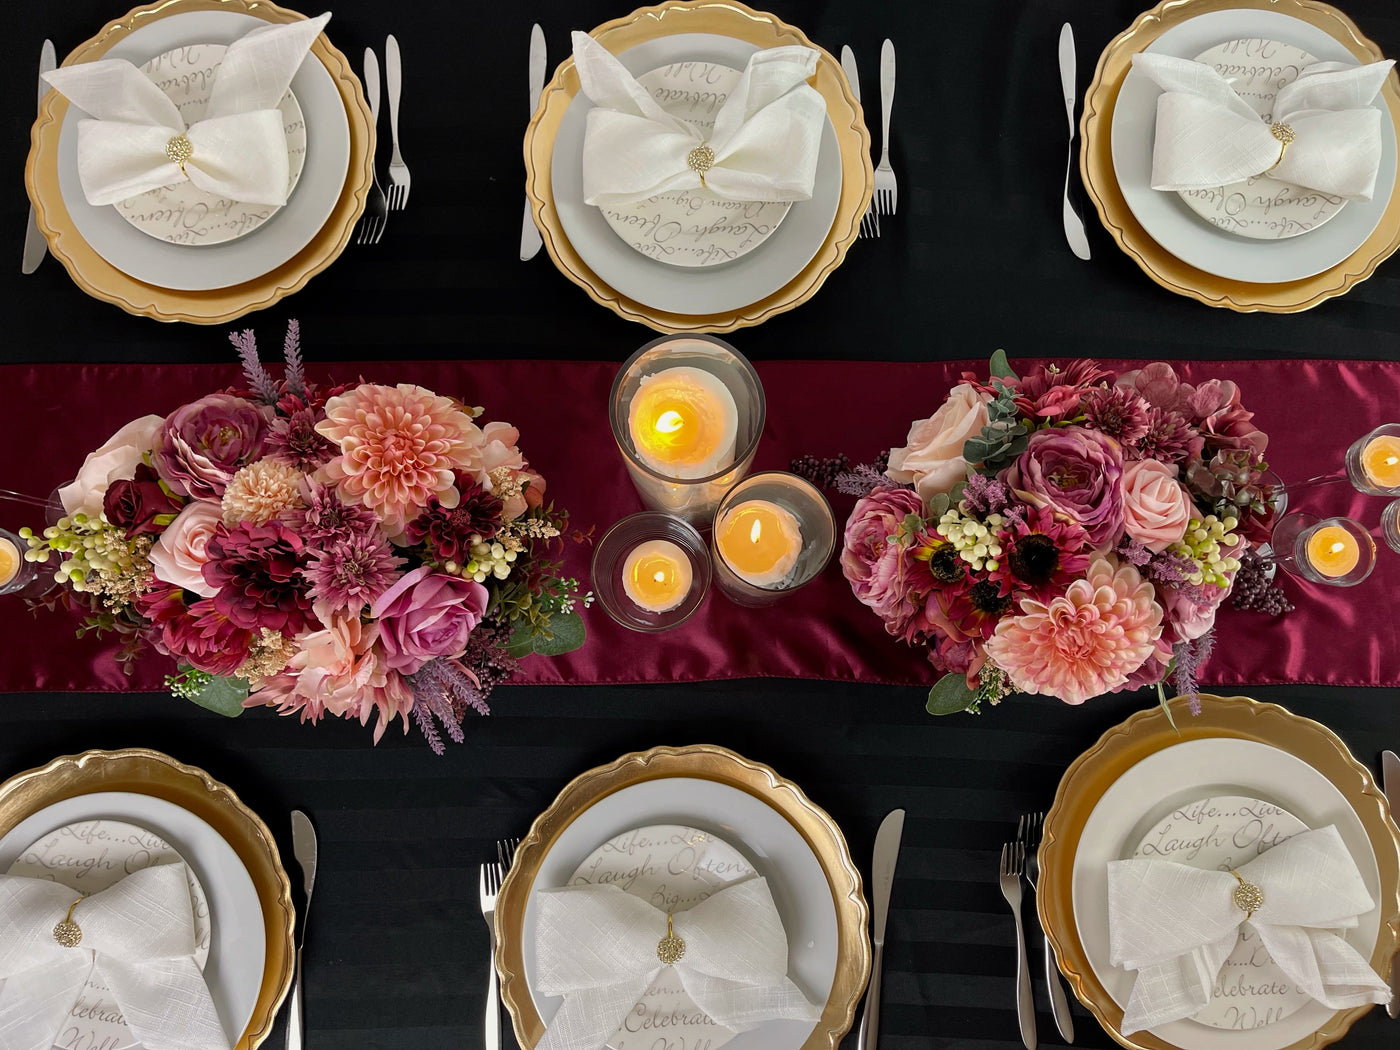  Ornate gold chargers shown on black tablecloth with with white napkins and gold napkin rings